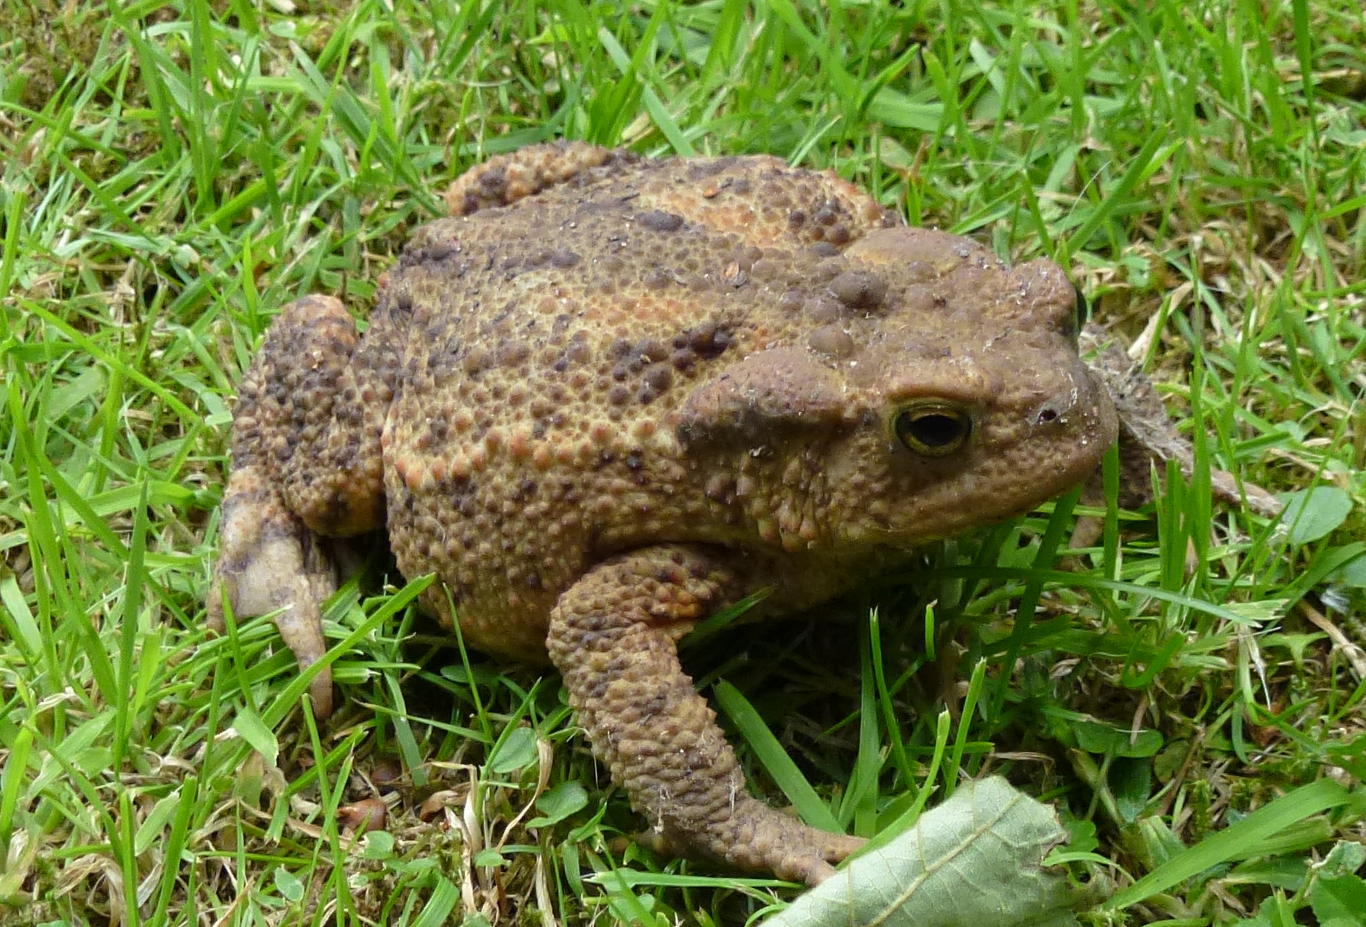 The common toad (Bufo bufo)